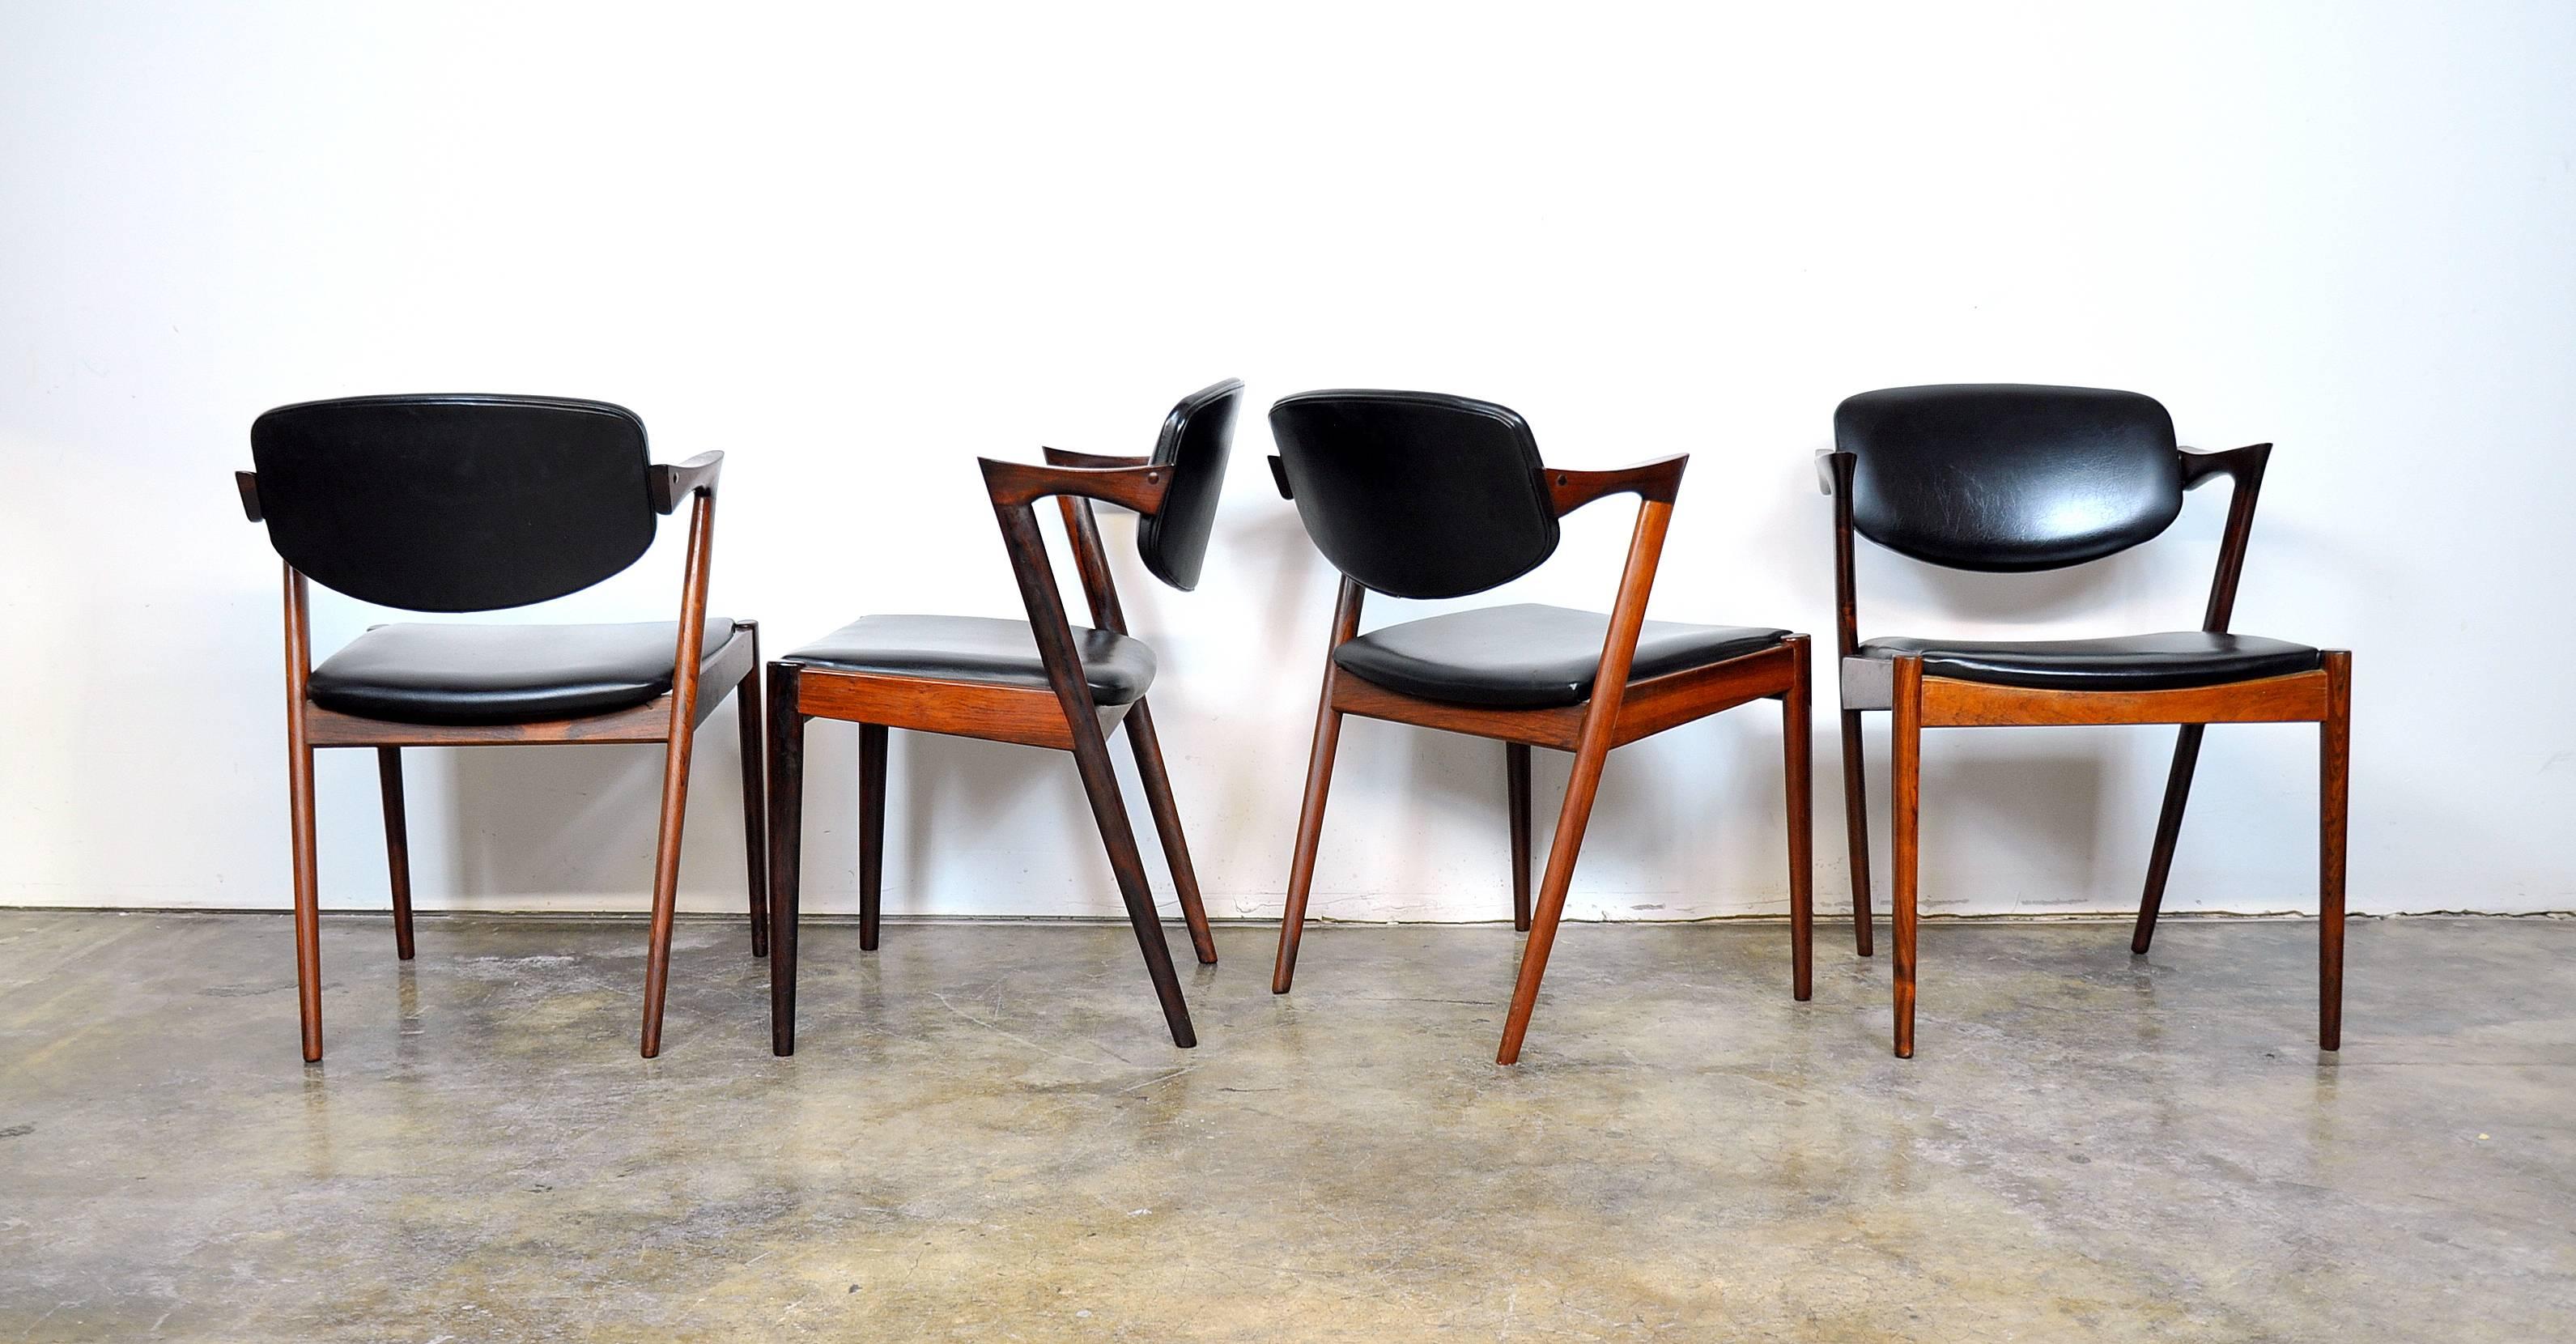 Striking set of Mid-Century Danish Modern rosewood model #42 dining armchairs designed by Kai Kristiansen for Schou Andersen, dating from the mid-1960s. The chairs feature stunning lines with masterful angles and curves, tilting backrests and